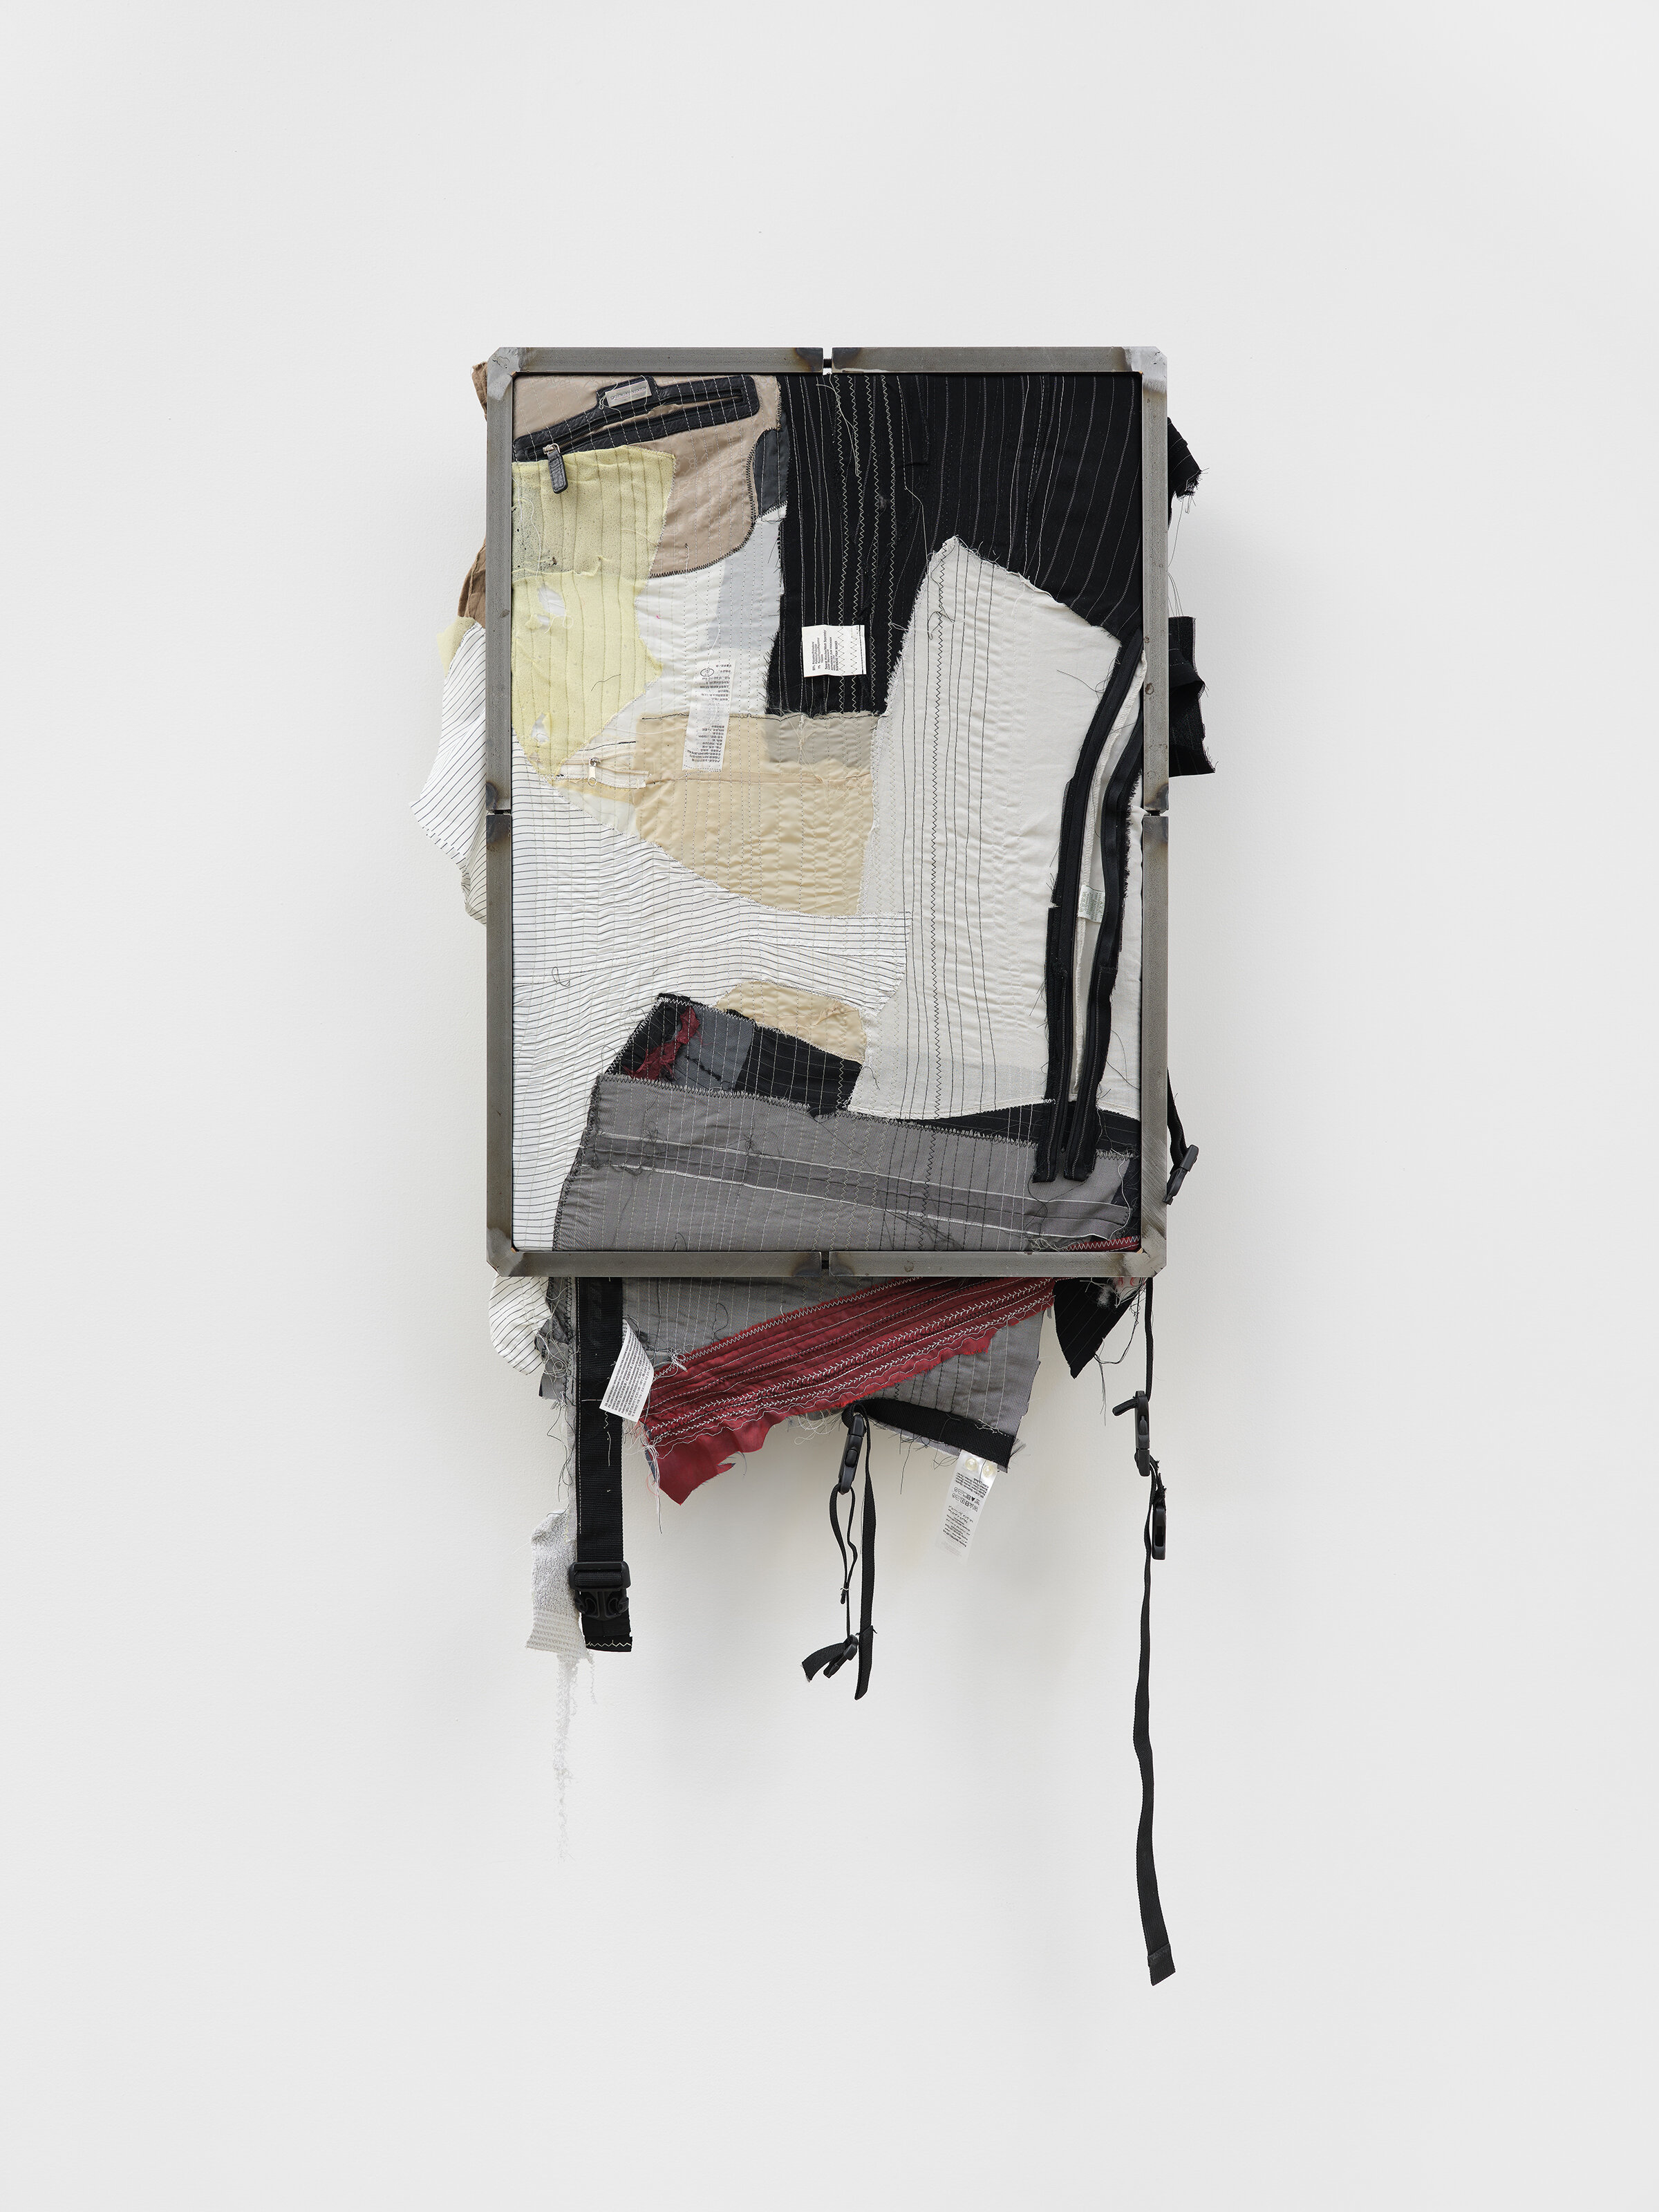  Tenant of Culture  Grip and Stitch , 2020 Steel, recycled hand bag linings, miscellaneous recycled garment pieces, thread, padding  29 x 21.5 x 5 in (74 x 54 x 12 cm) ToC1 (ToC3) 